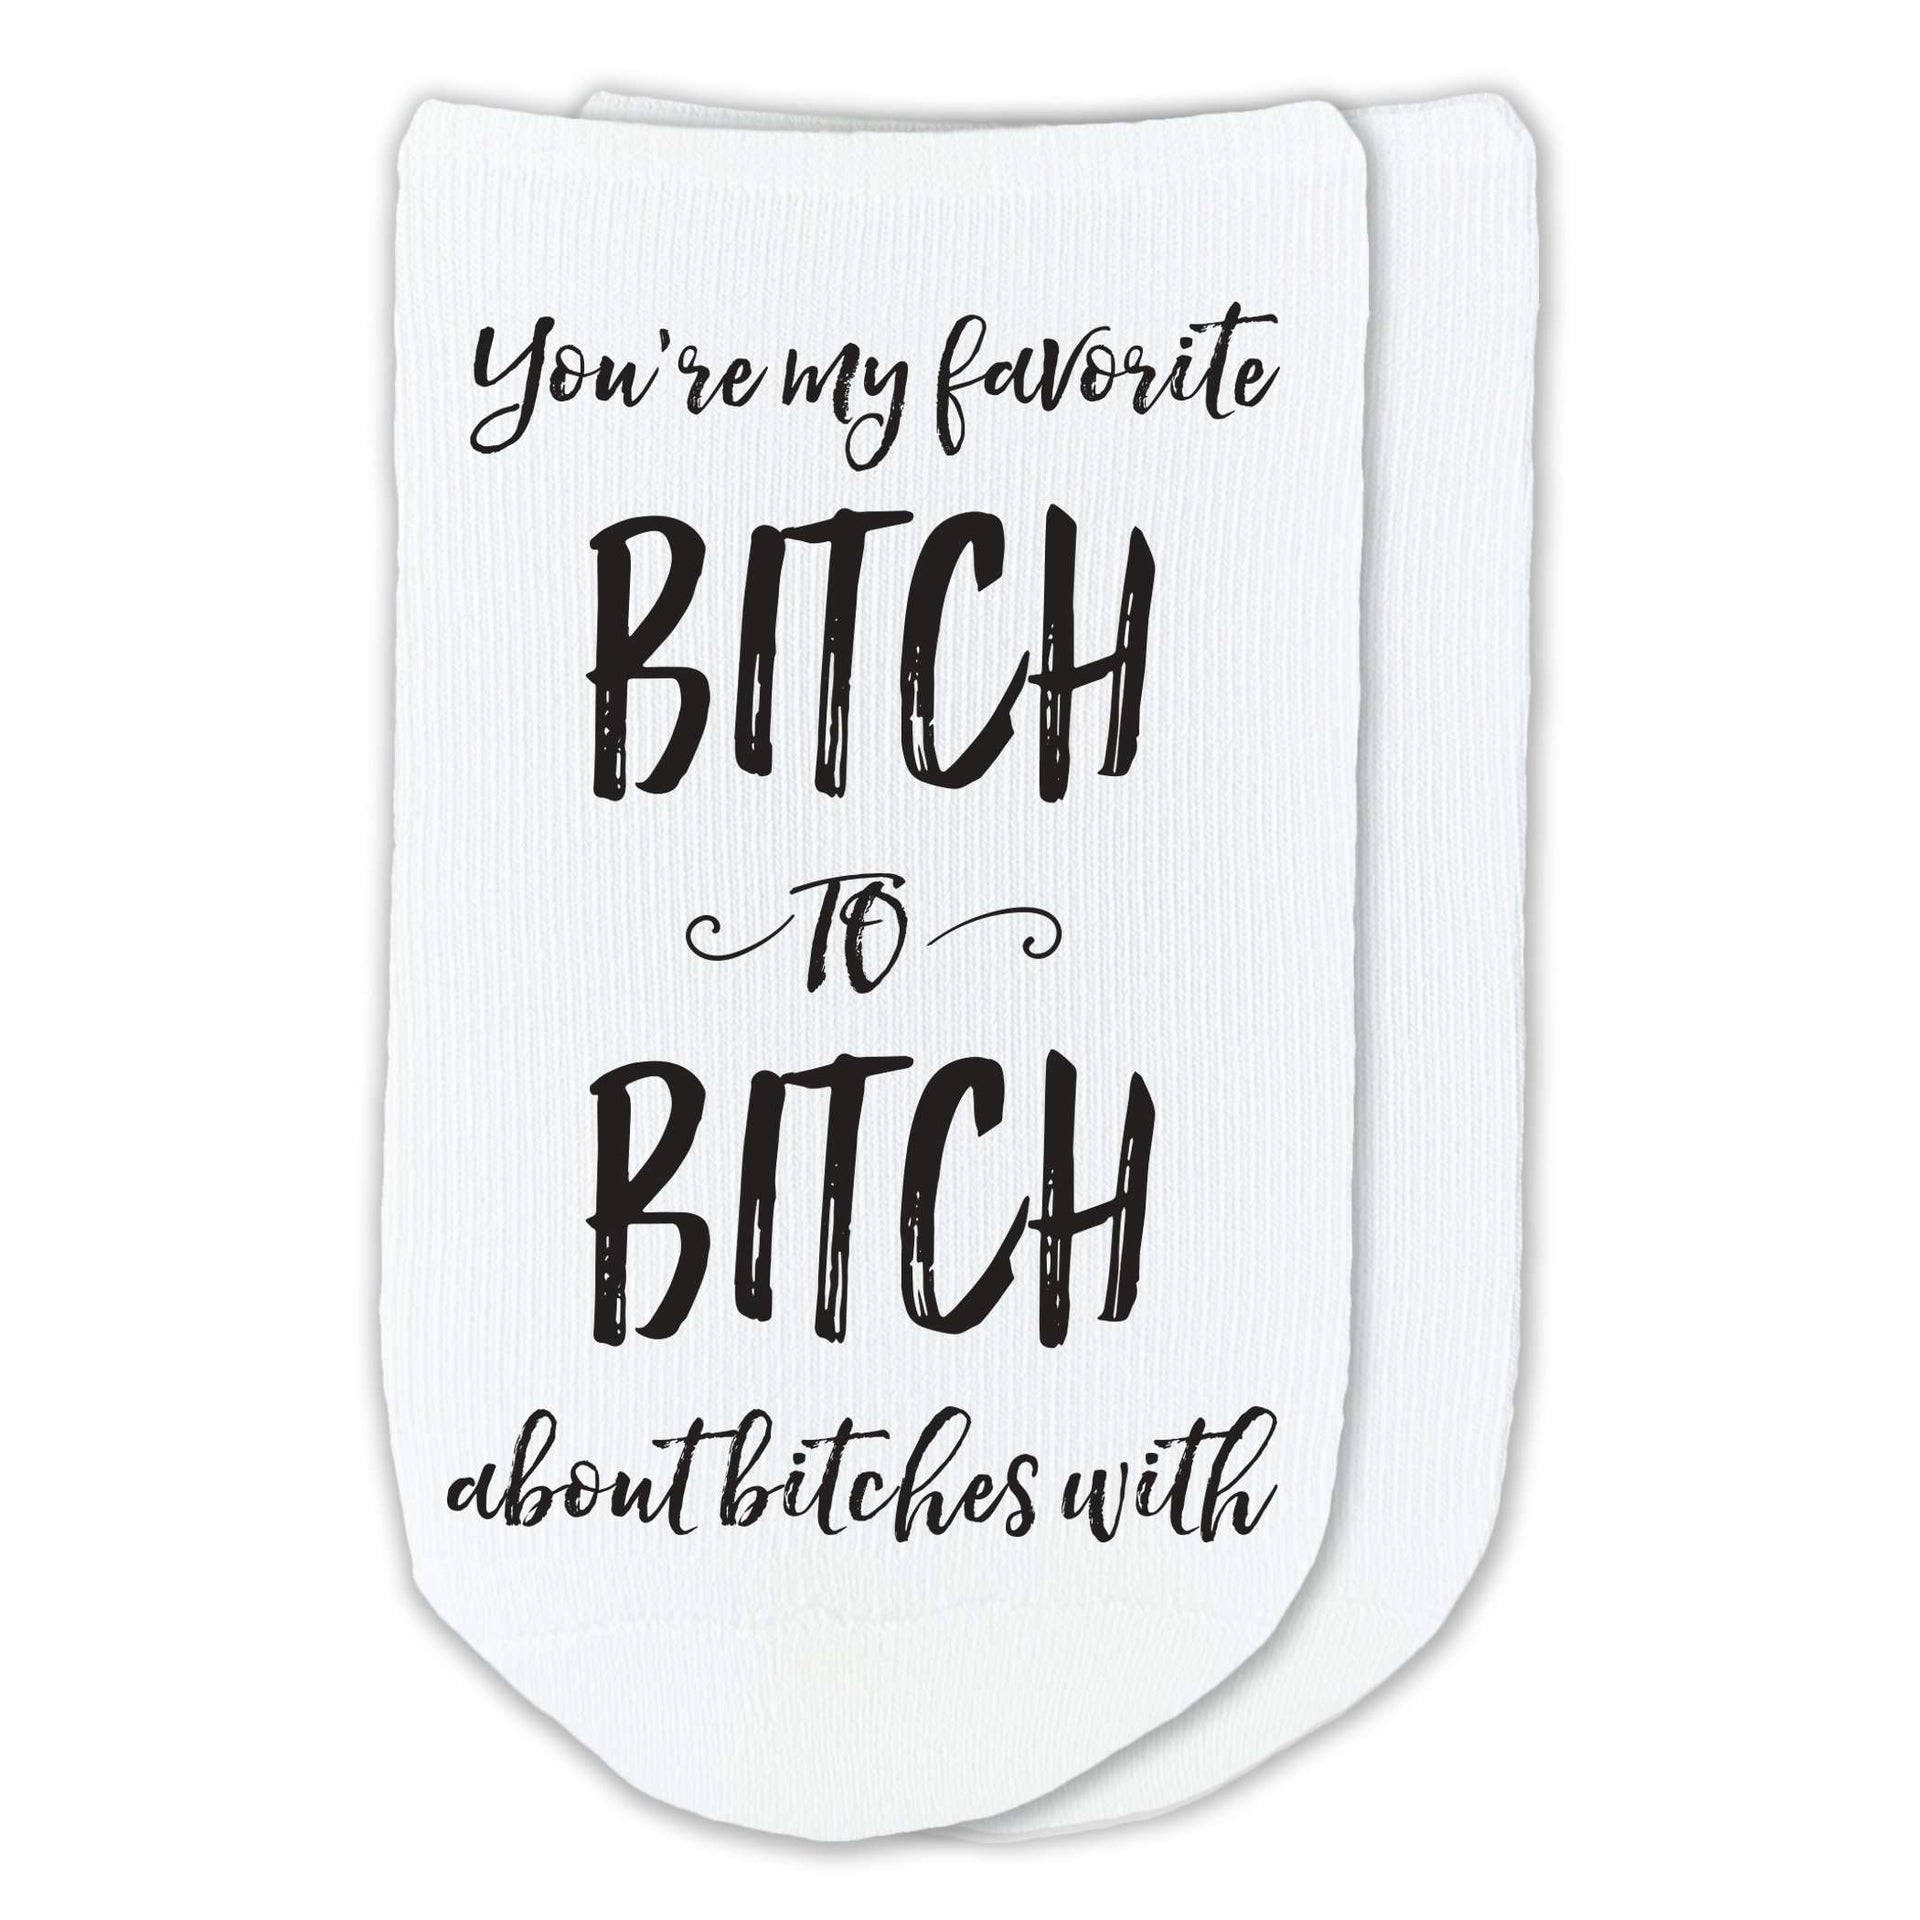 You're my favorite bitch to bitch about bitches with custom printed on soft comfy cotton no show socks.